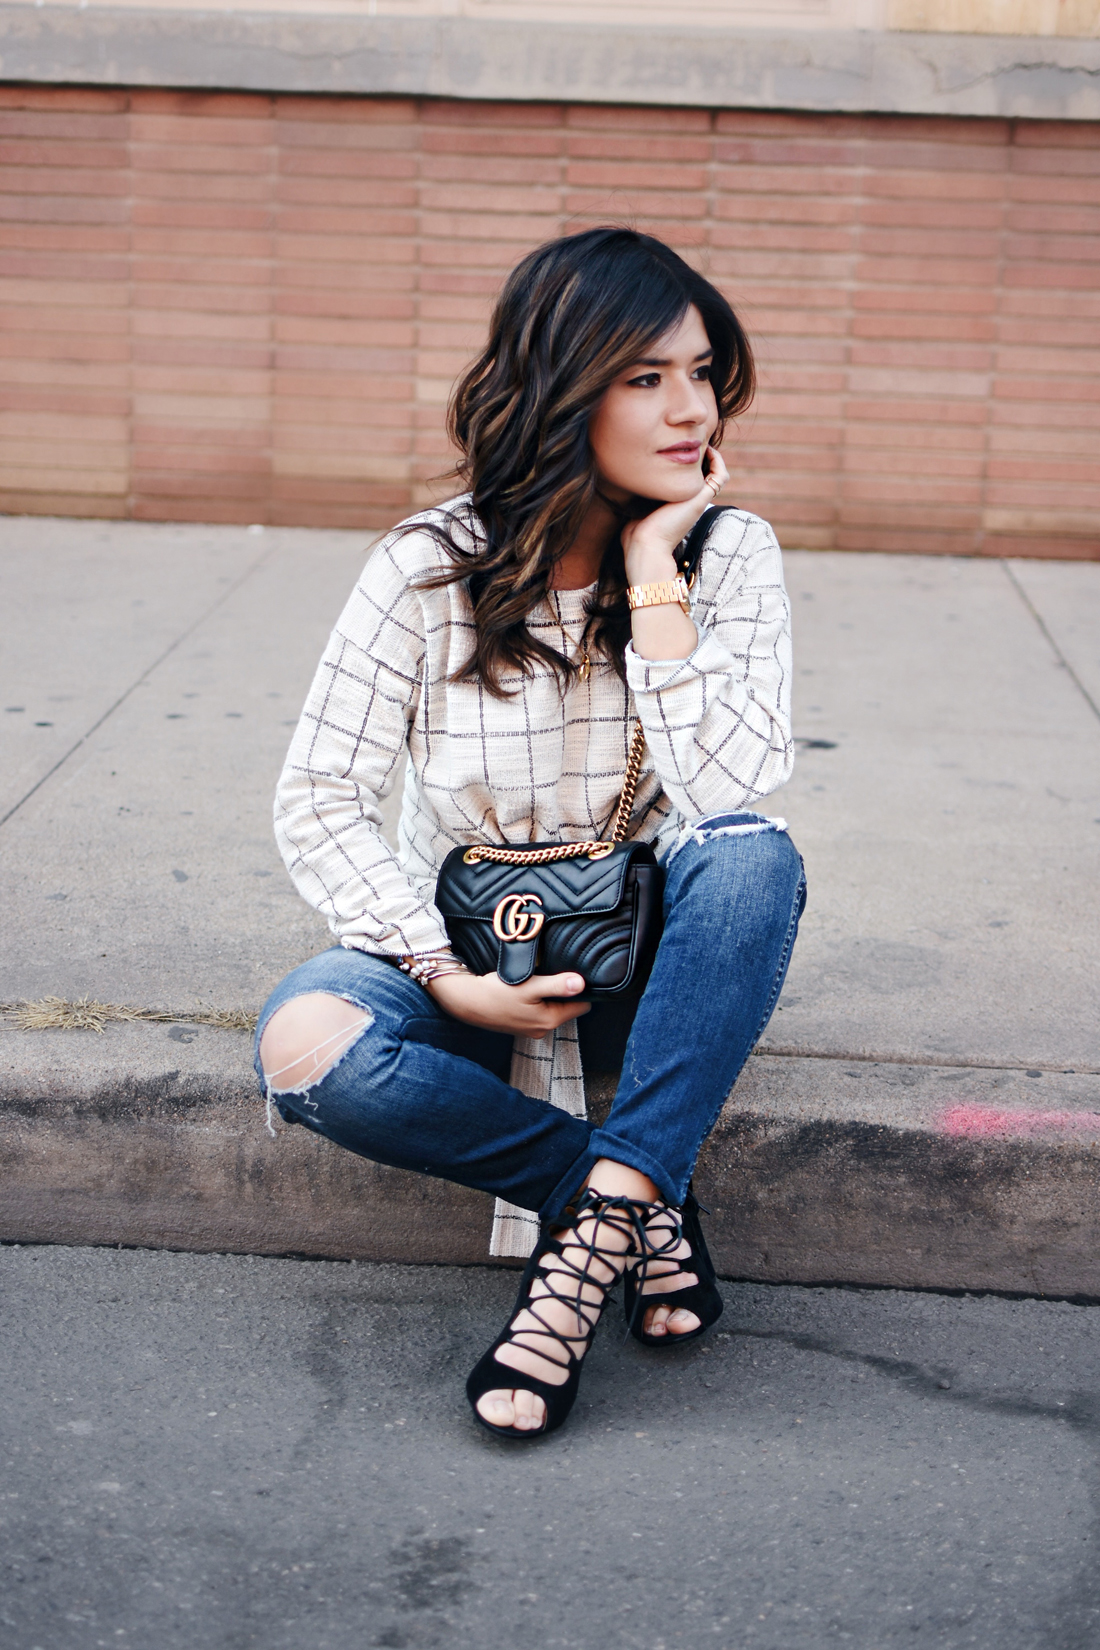 Carolina Hellal of Chic Talk wearing a Madewell top, Madewell jeans, Public Desire shoes and Gucci bag.